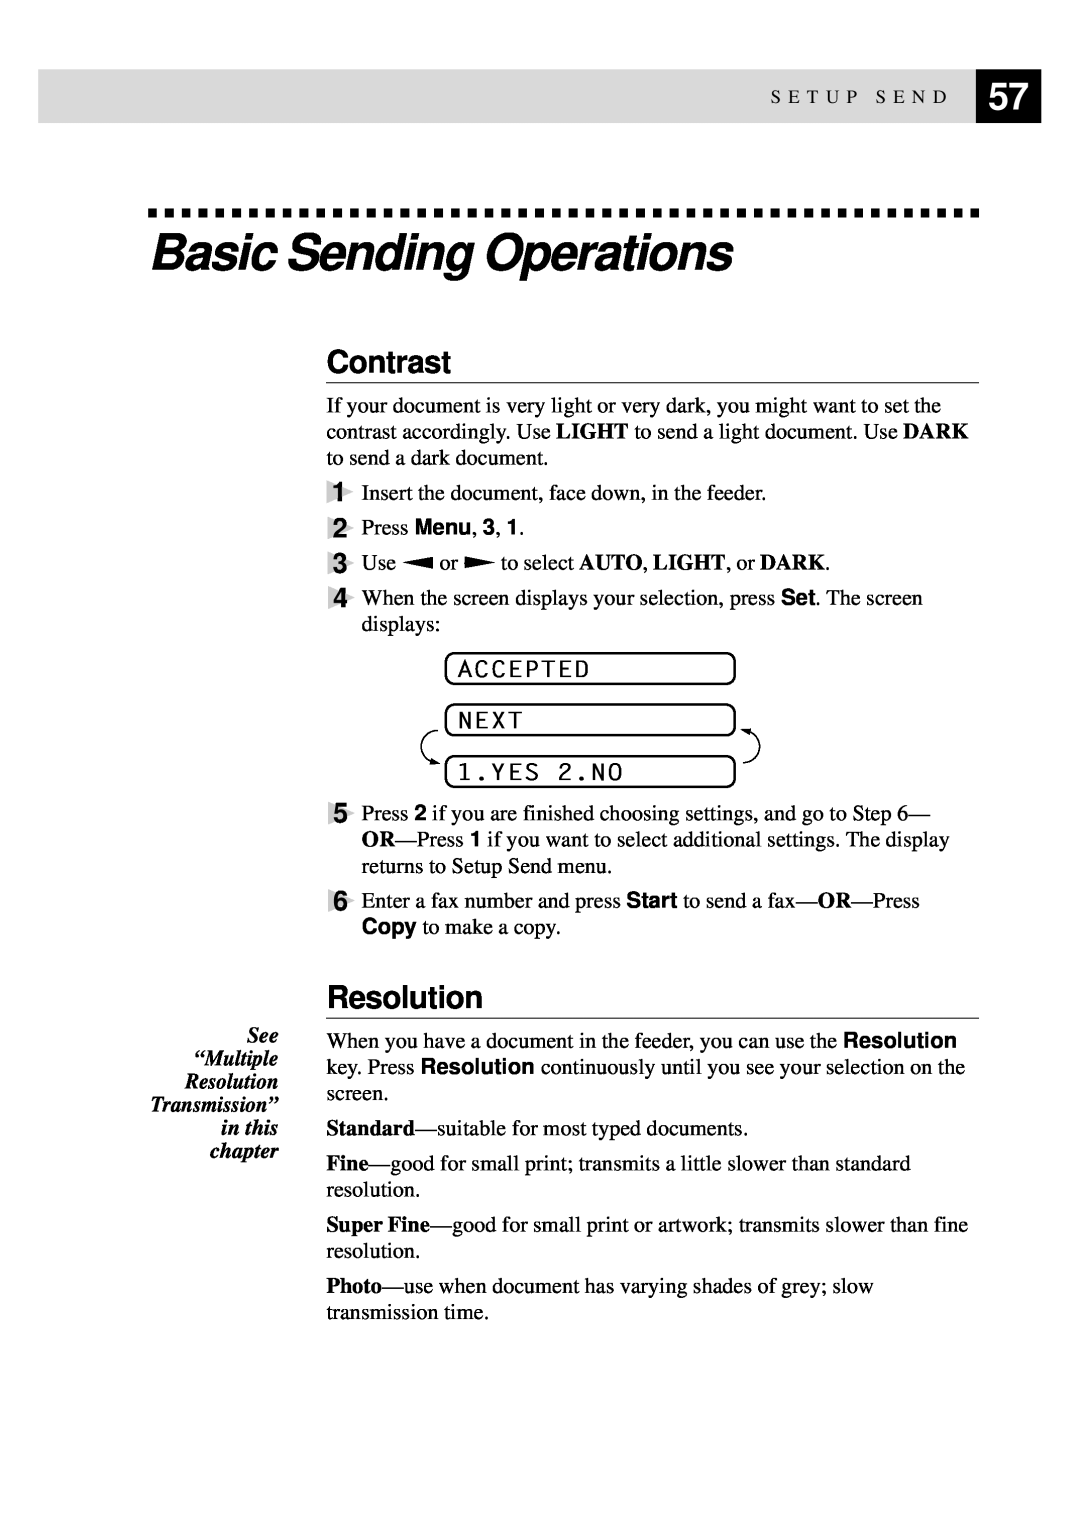 Brother 515 manual Basic Sending Operations, Contrast, Resolution, ACCEPTED NEXT 1.YES 2.NO 